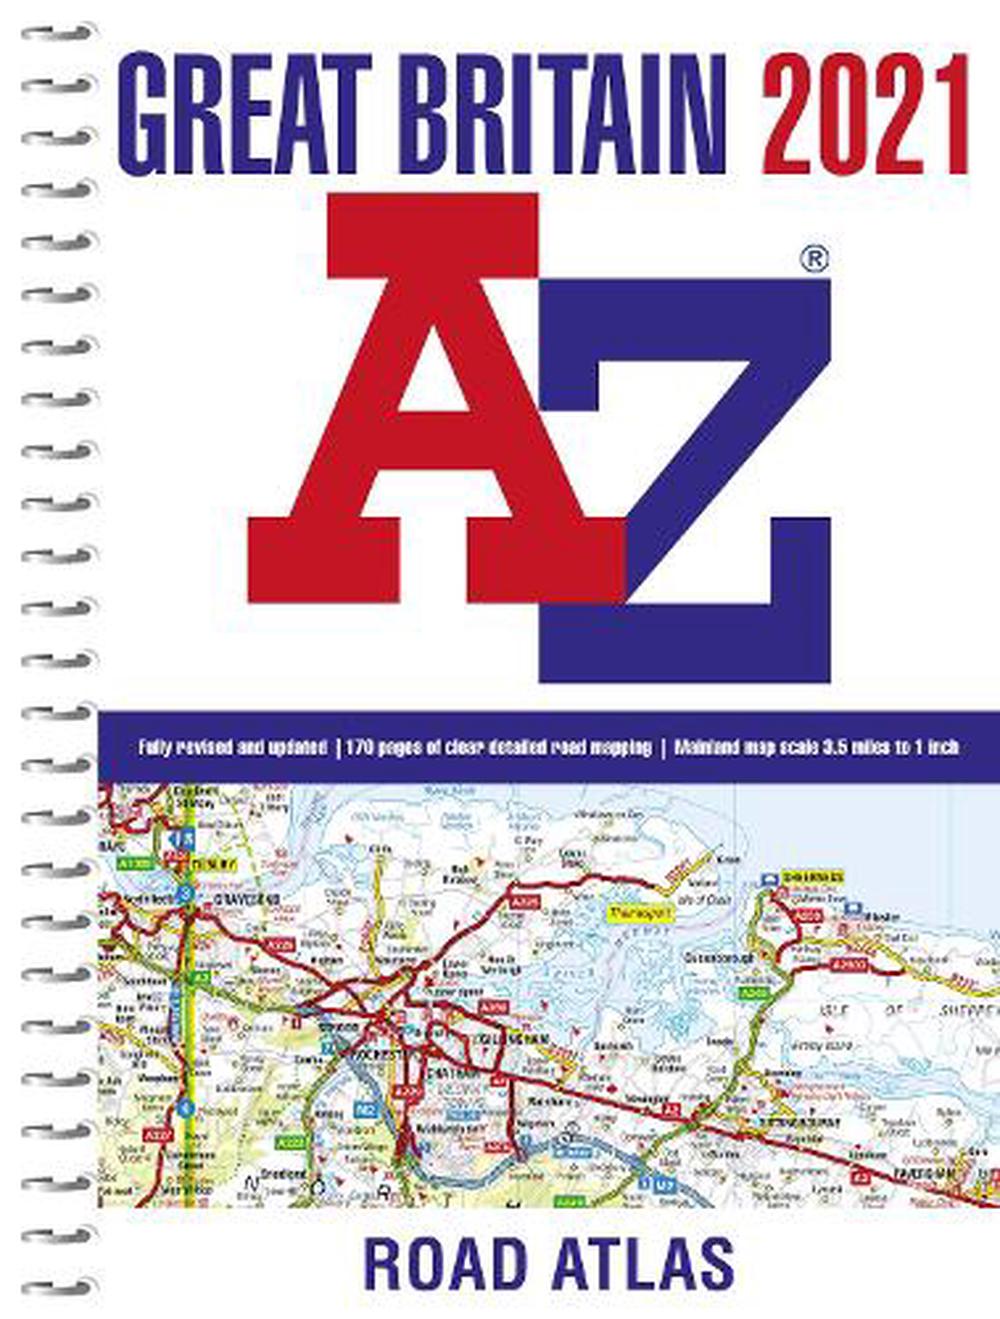 Great Britain A Z Road Atlas 2021 A4 Spiral By A Z Maps English